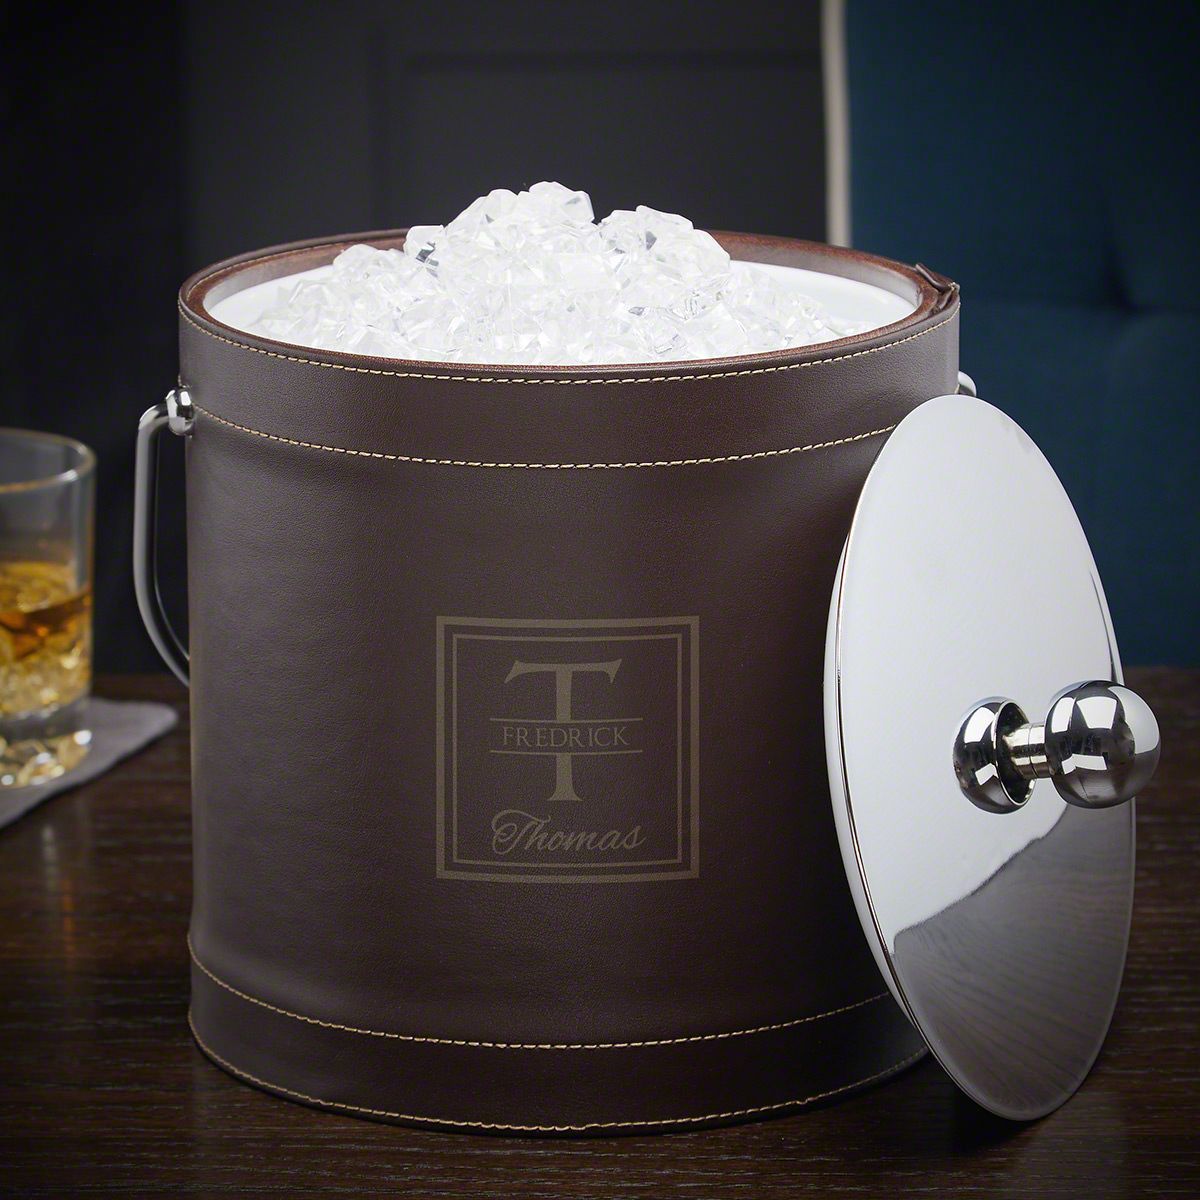 This personalized ice bucket is double walled insulated so ice will stay frozen for hours and ensures the bucket won’t sweat, making it easy to transport and keeping surfaces clean. Also, it can be personalized with his initial and name.